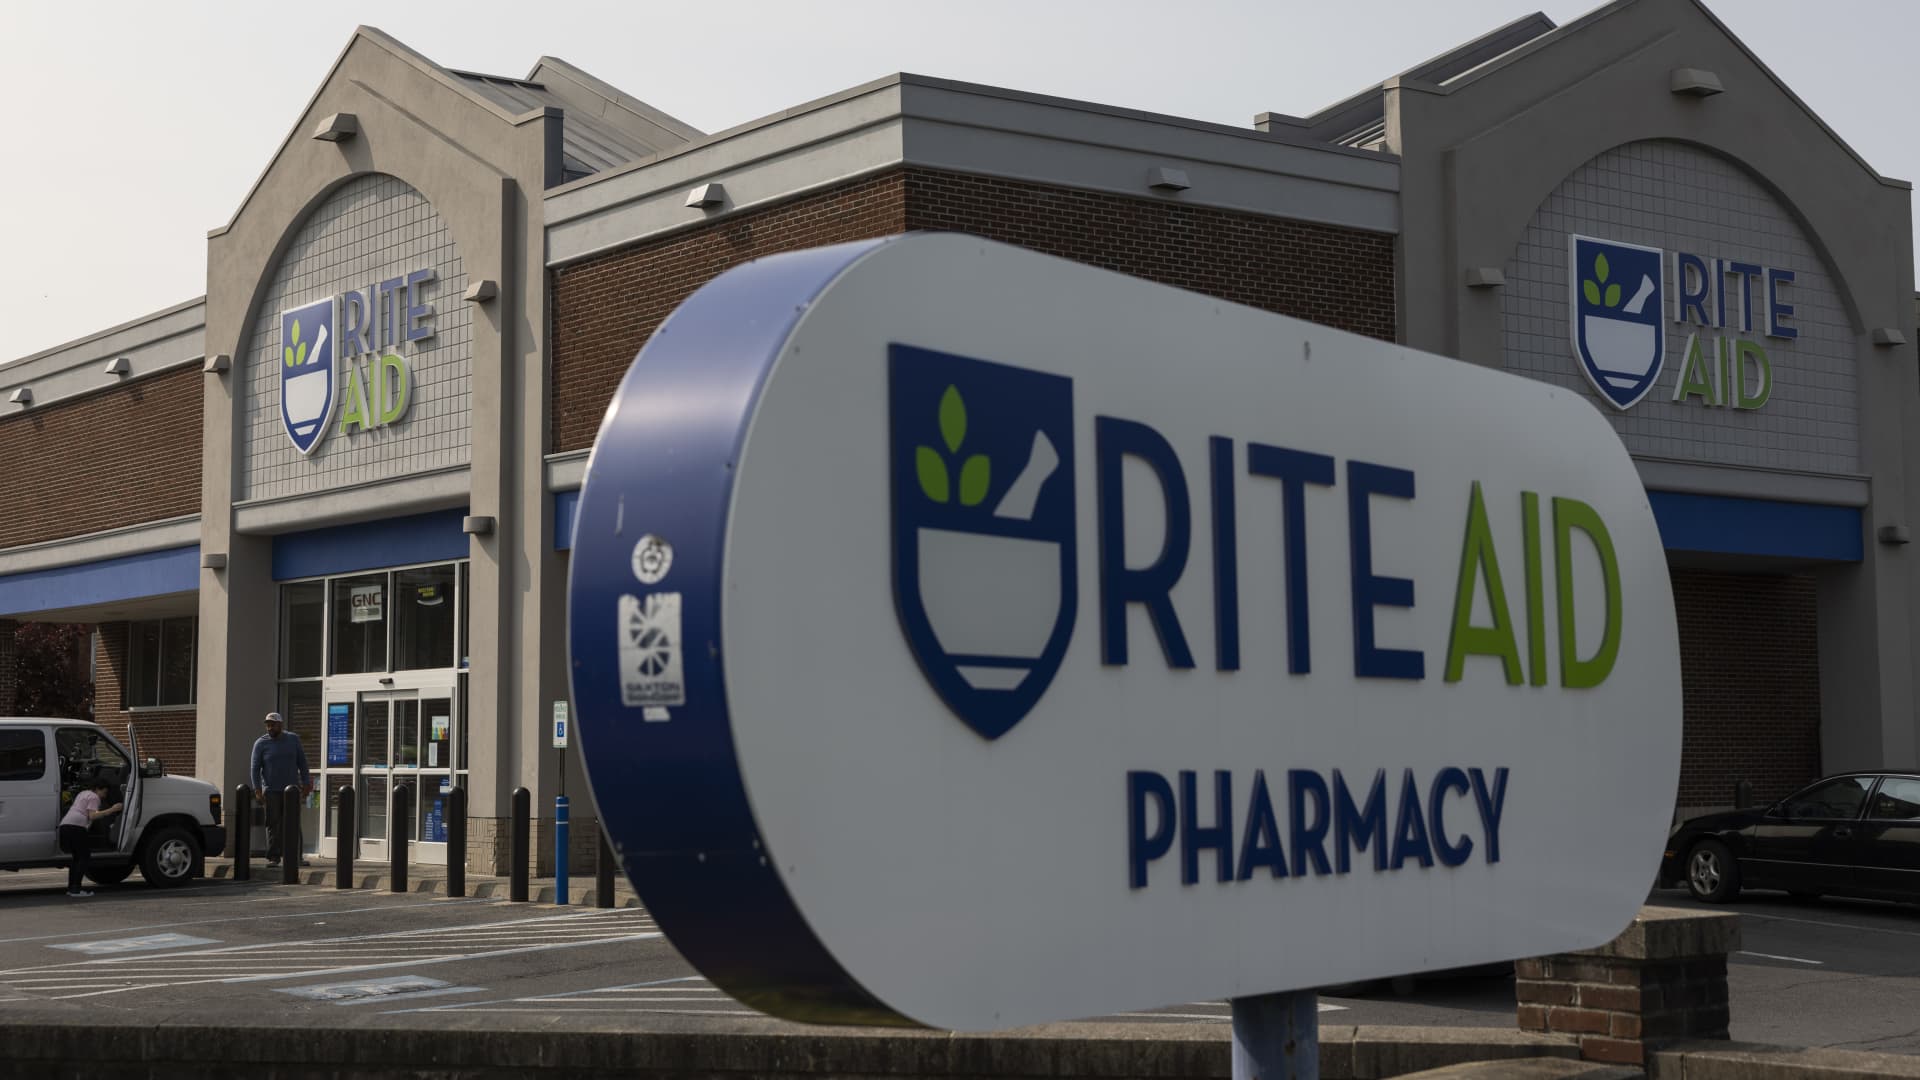 Rite Aid lost more than $1 billion in months before bankruptcy filing